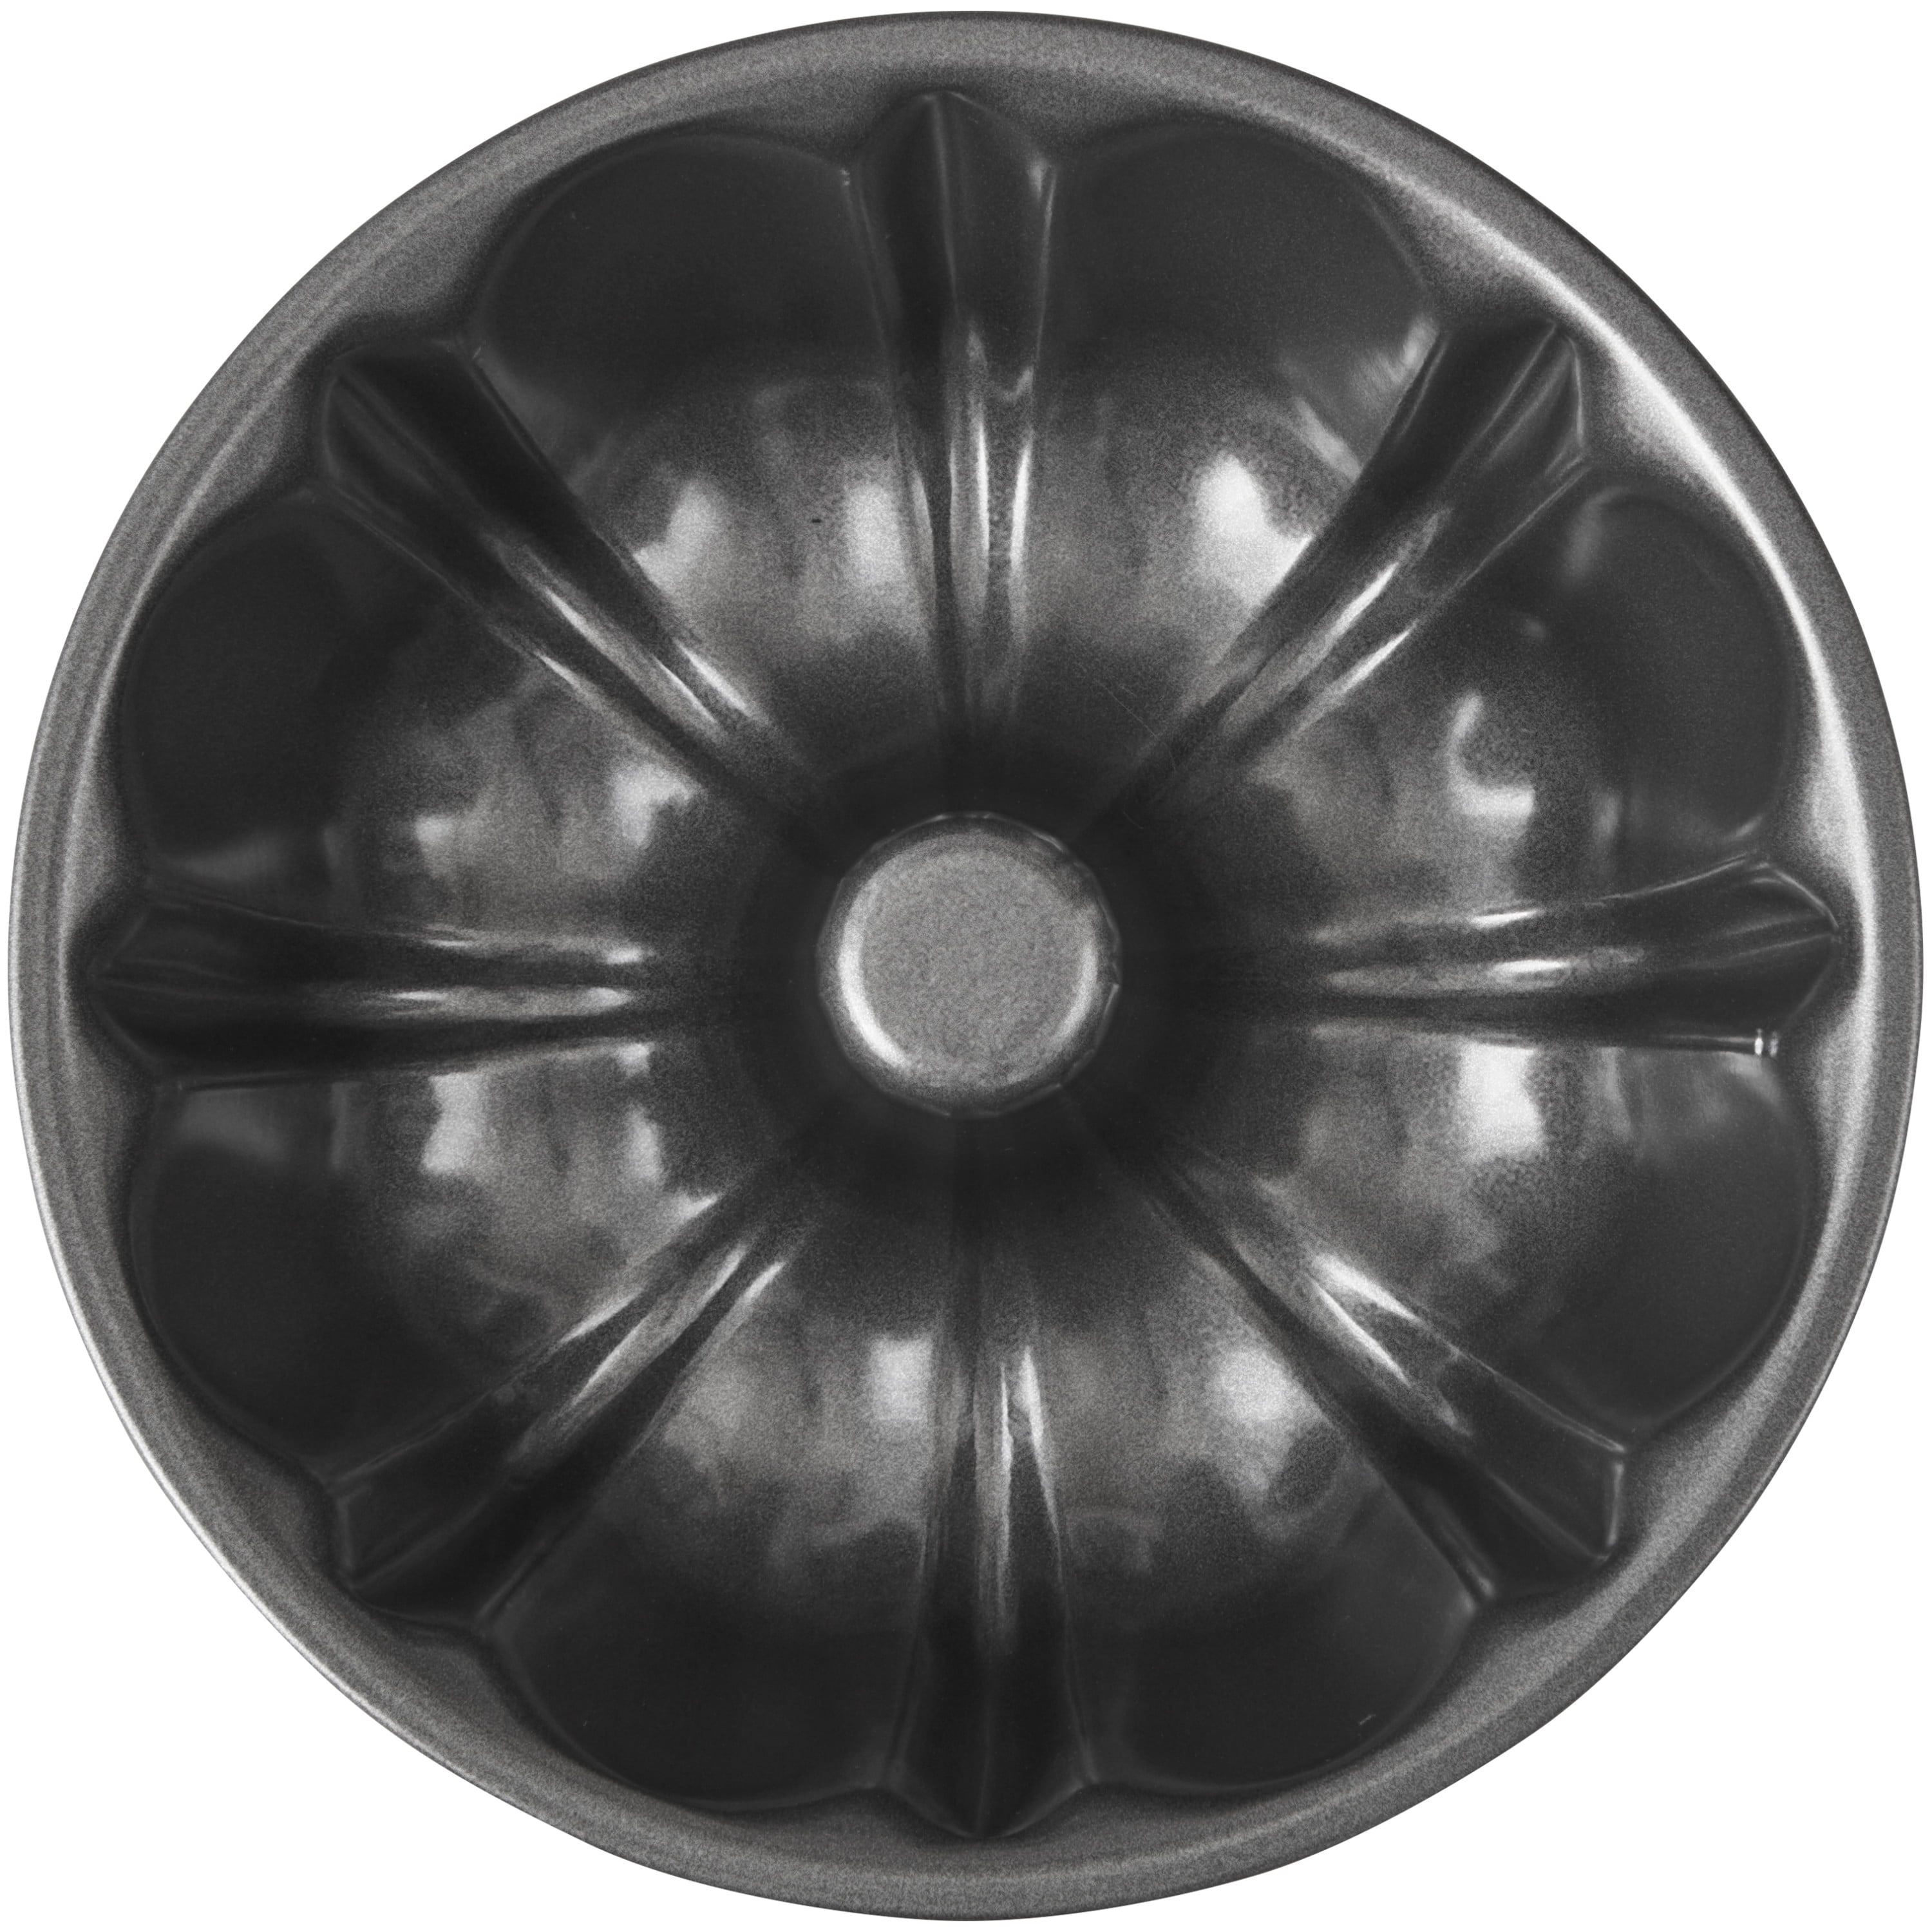  Wilton Excelle Elite Non-Stick 6-Cavity Mini Fluted Tube Baking  Pan: Individual Serving Bakeware Products: Home & Kitchen